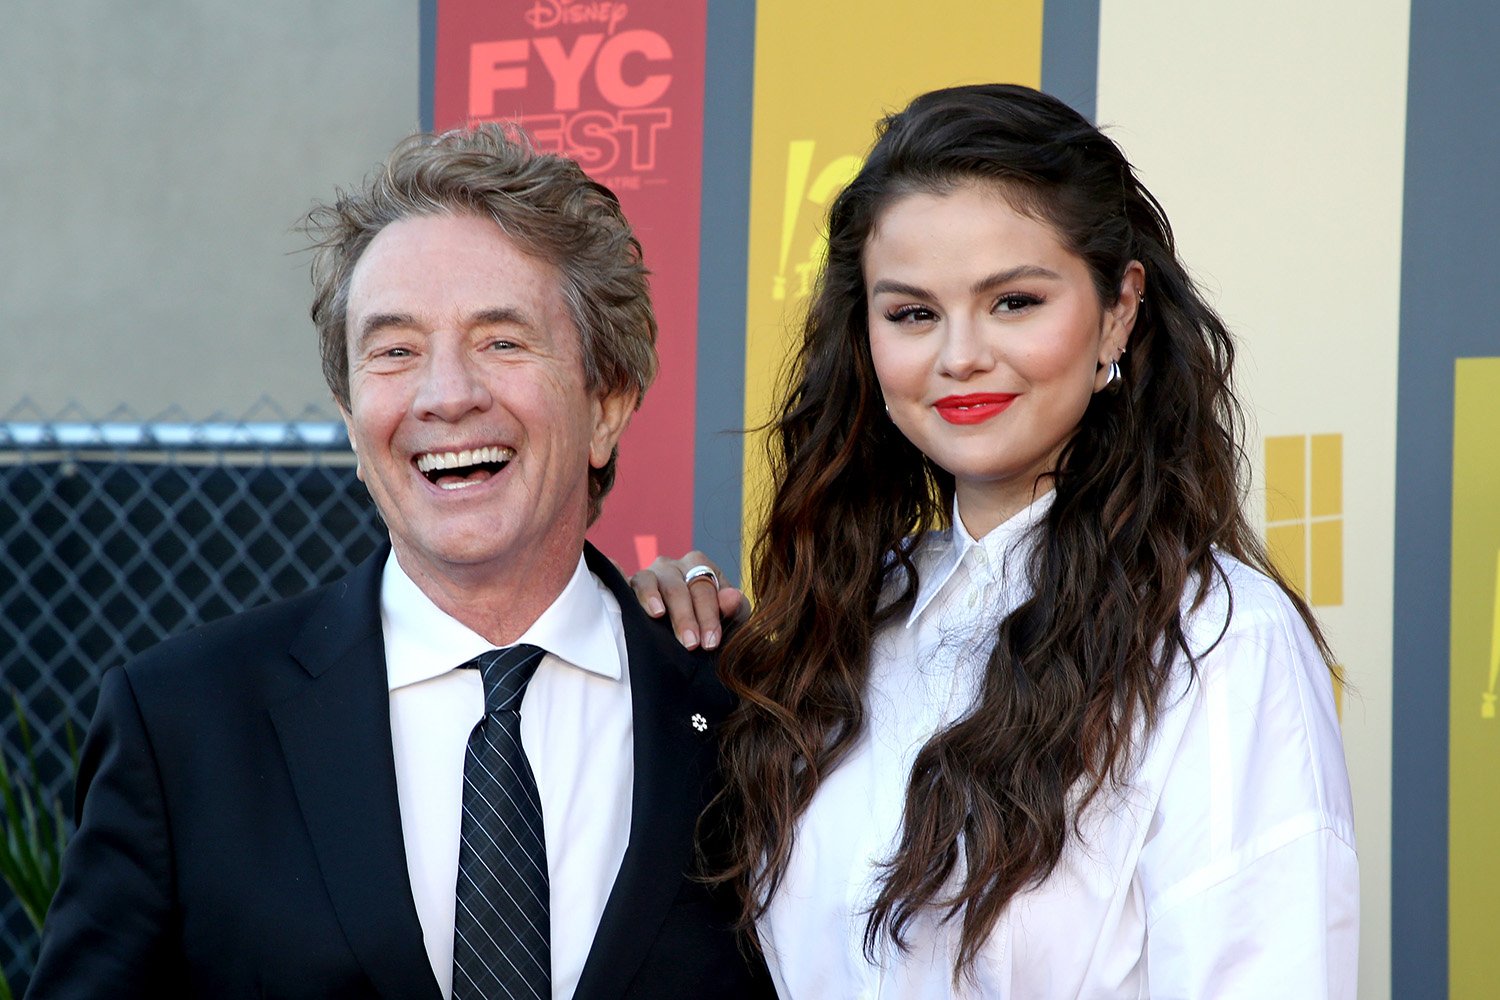 Only Murders in the Building stars Martin Short and Selena Gomez, who apparently roast each other on set.